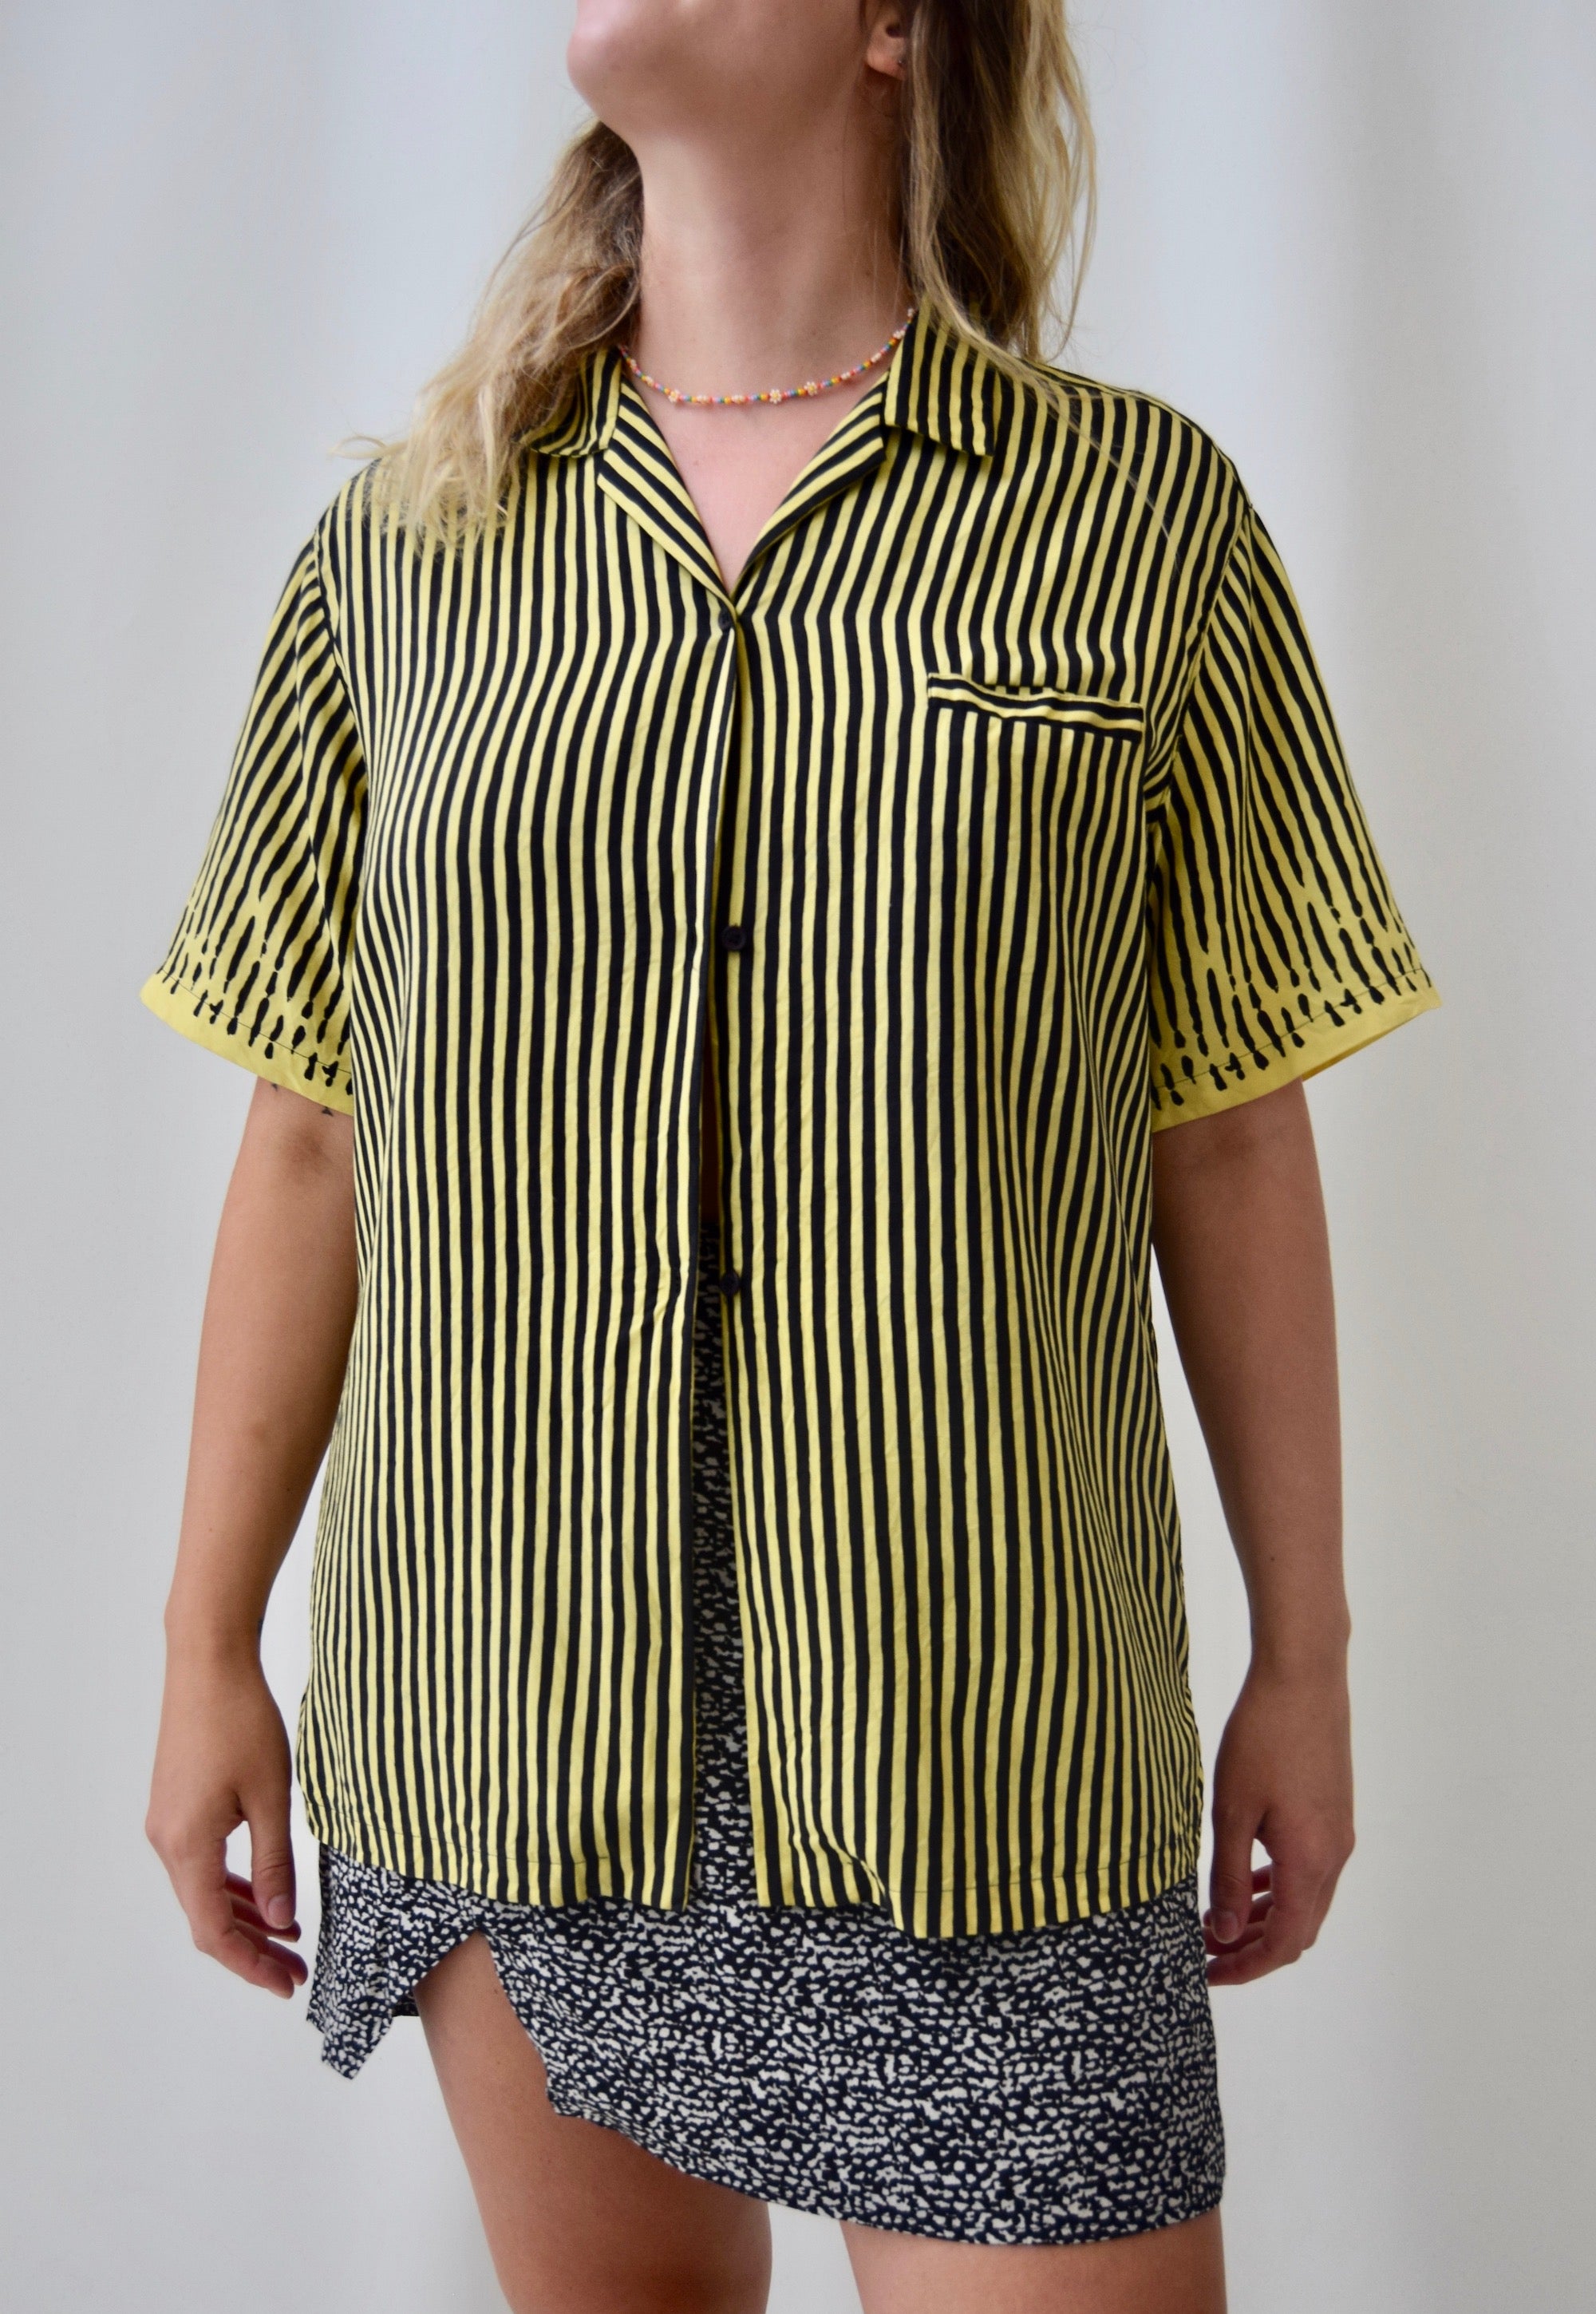 Stephen Sprouse Black and Yellow, Black and Yellow Silk Top